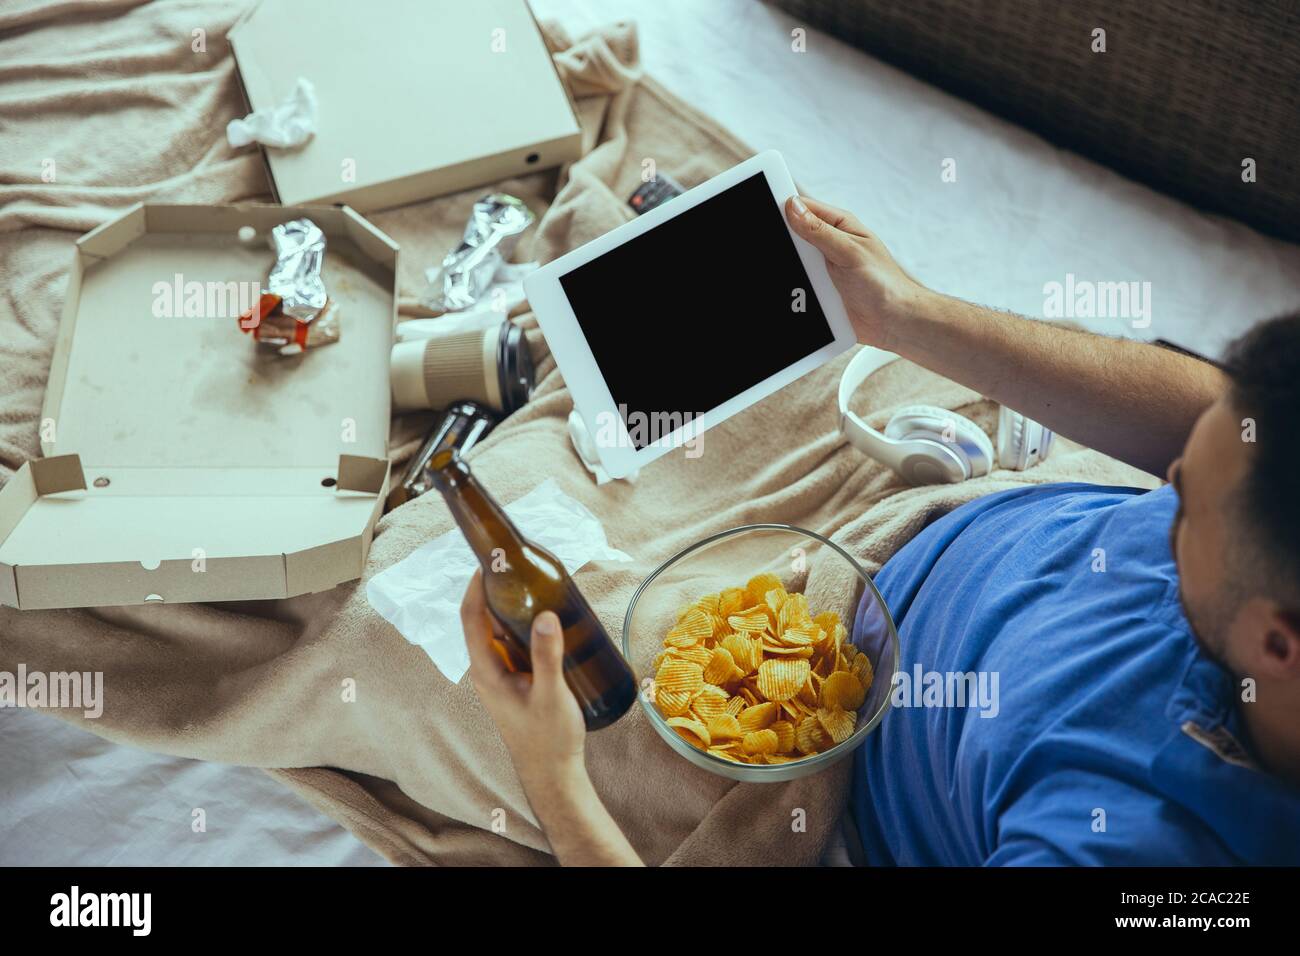 Eating crisps, drinks beer. Lazy man living in his bed surrounded with messy. No need to go out to be happy. Using gadgets, watching movie and series, looks emotional. Tablet with copyspace for ad. Stock Photo